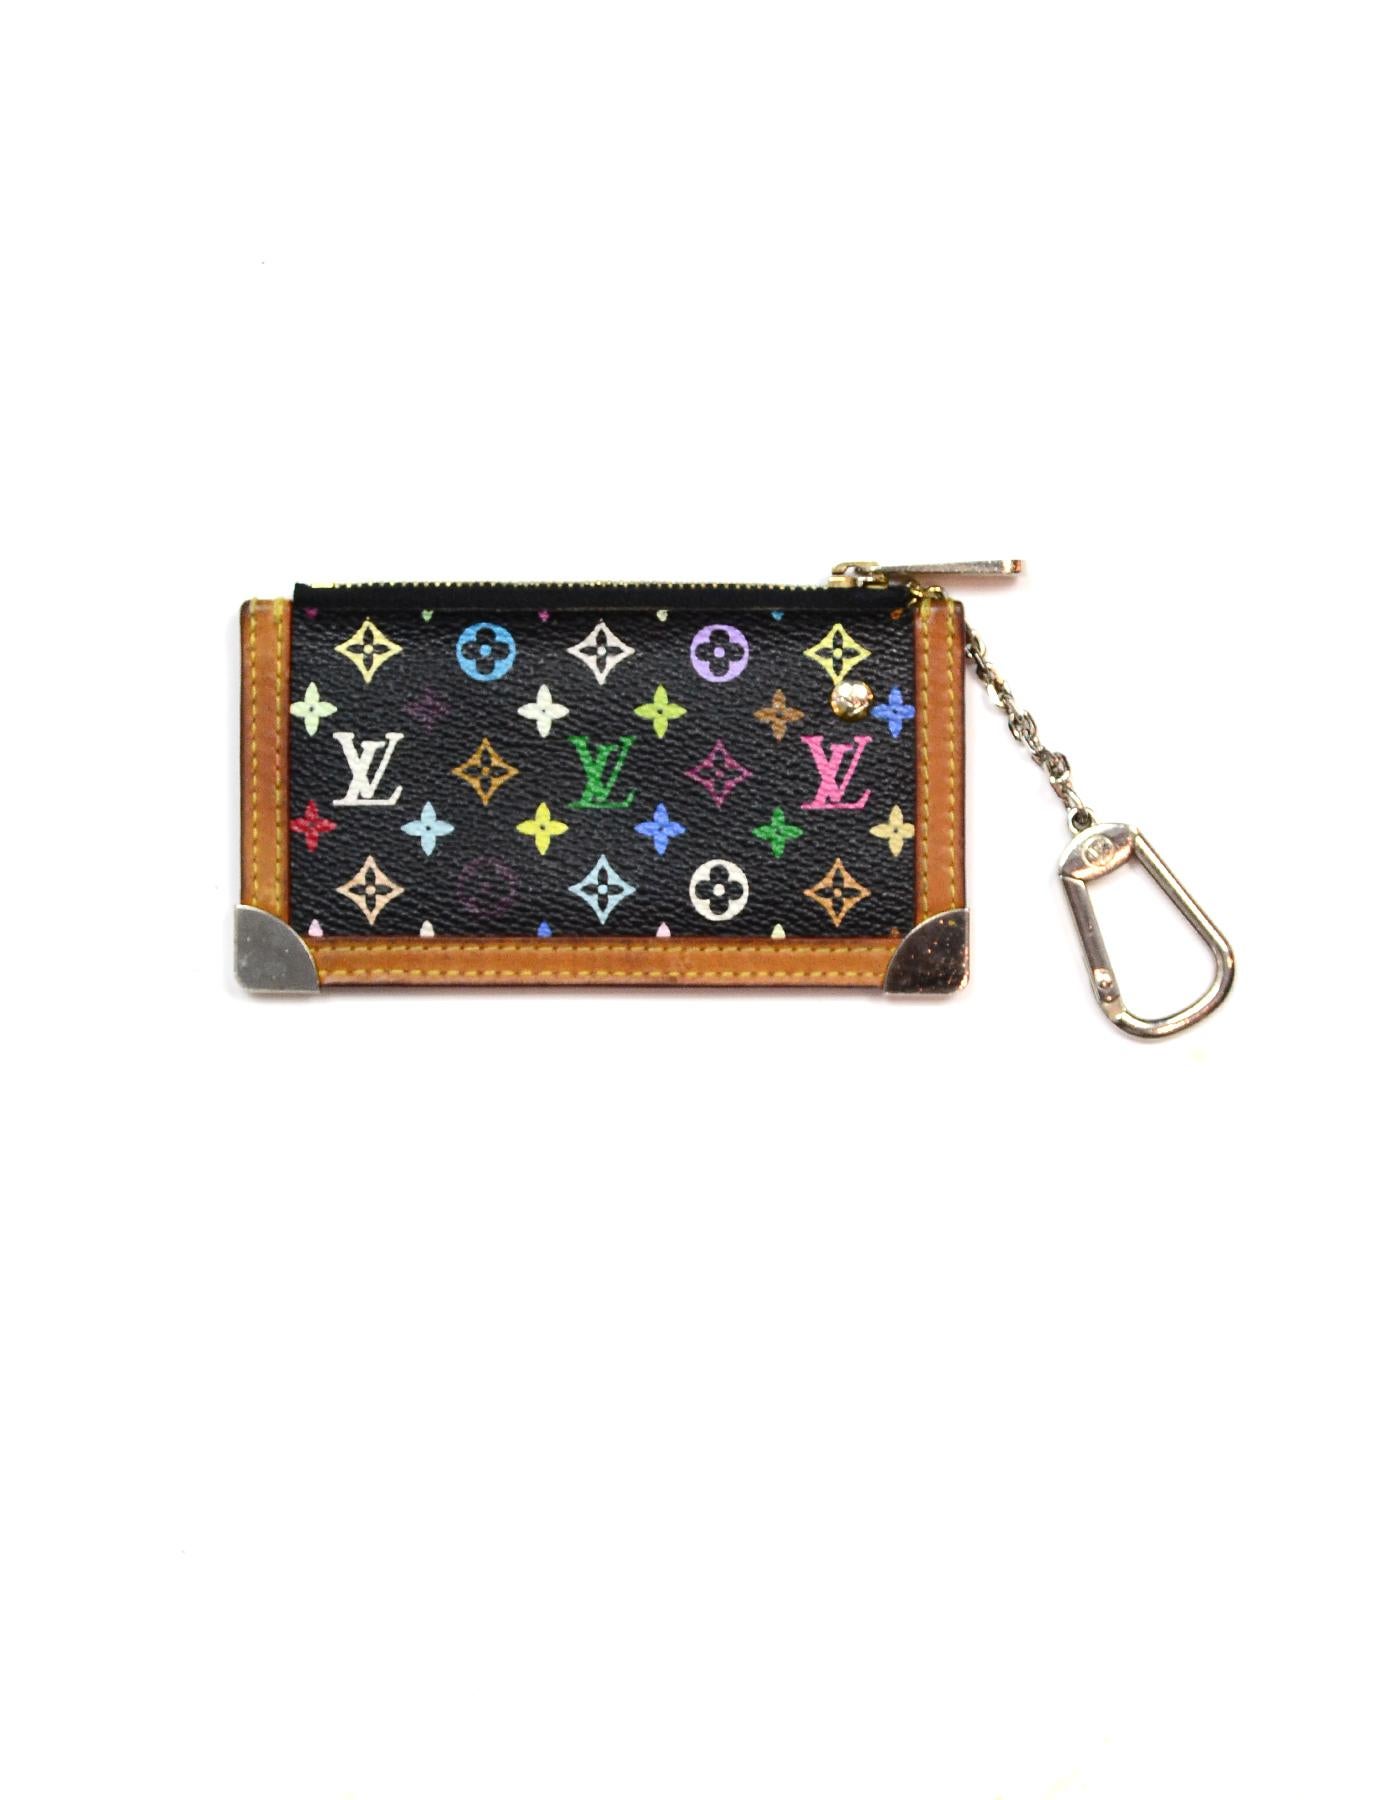 Louis Vuitton Black/Multicolore LV Monogram Key Chain Pouch/Coin Purse

Made In: Spain
Year of Production: 2004
Color: Black, multi-color, brown/tan
Hardware: Silver/goldtone (goldtone has evenly faded to be a silvertone)
Materials: Coated canvas,